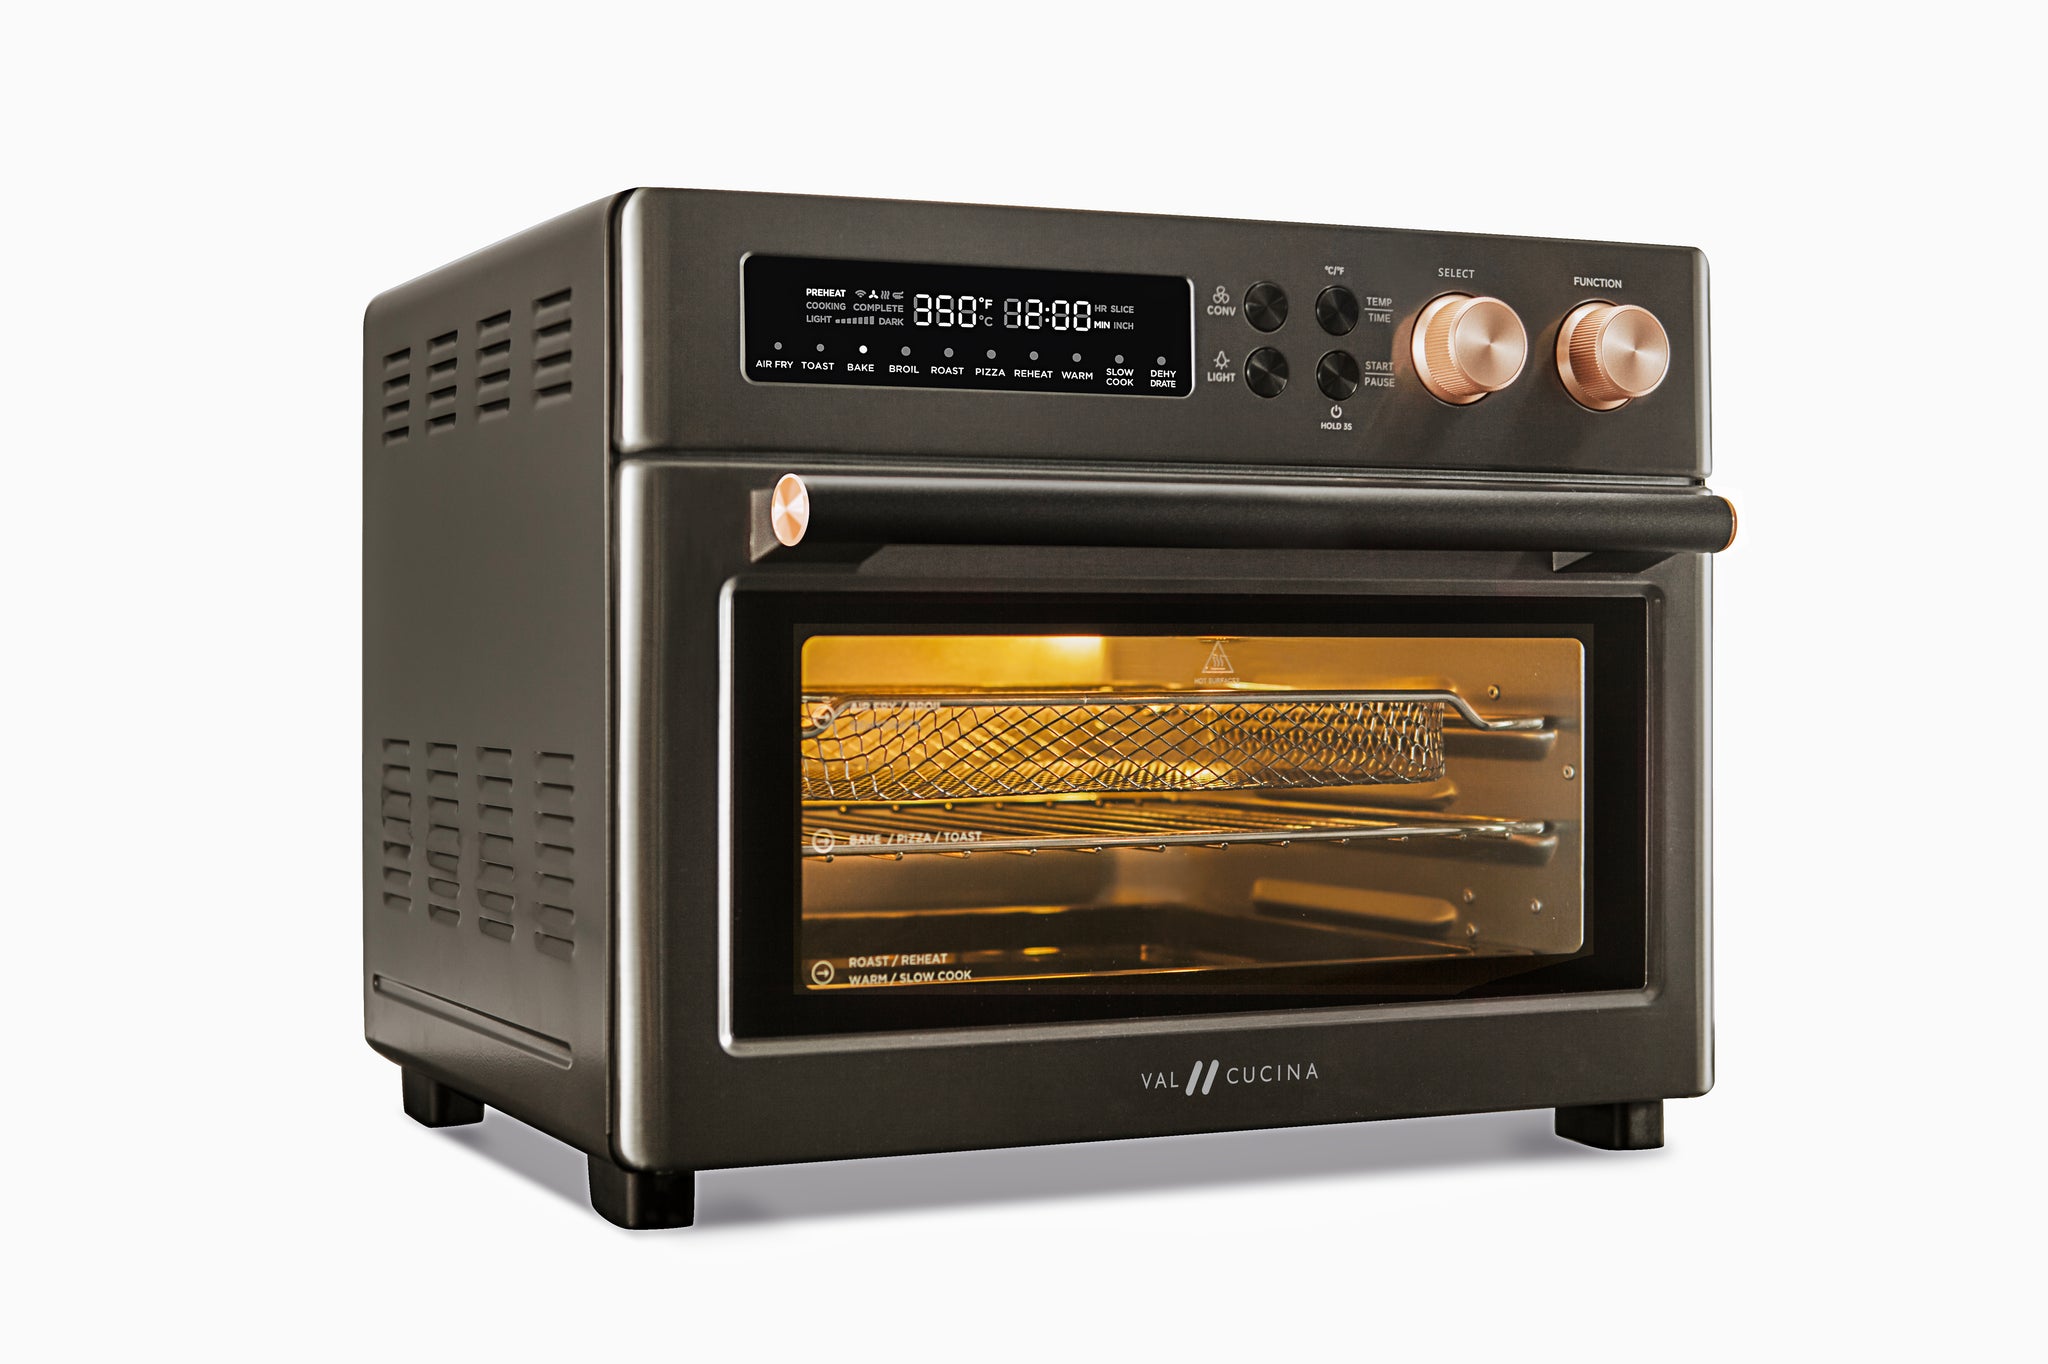 VAL CUCINA 10-in-1 Air Fryer Toaster Oven - Black Matte Stainless